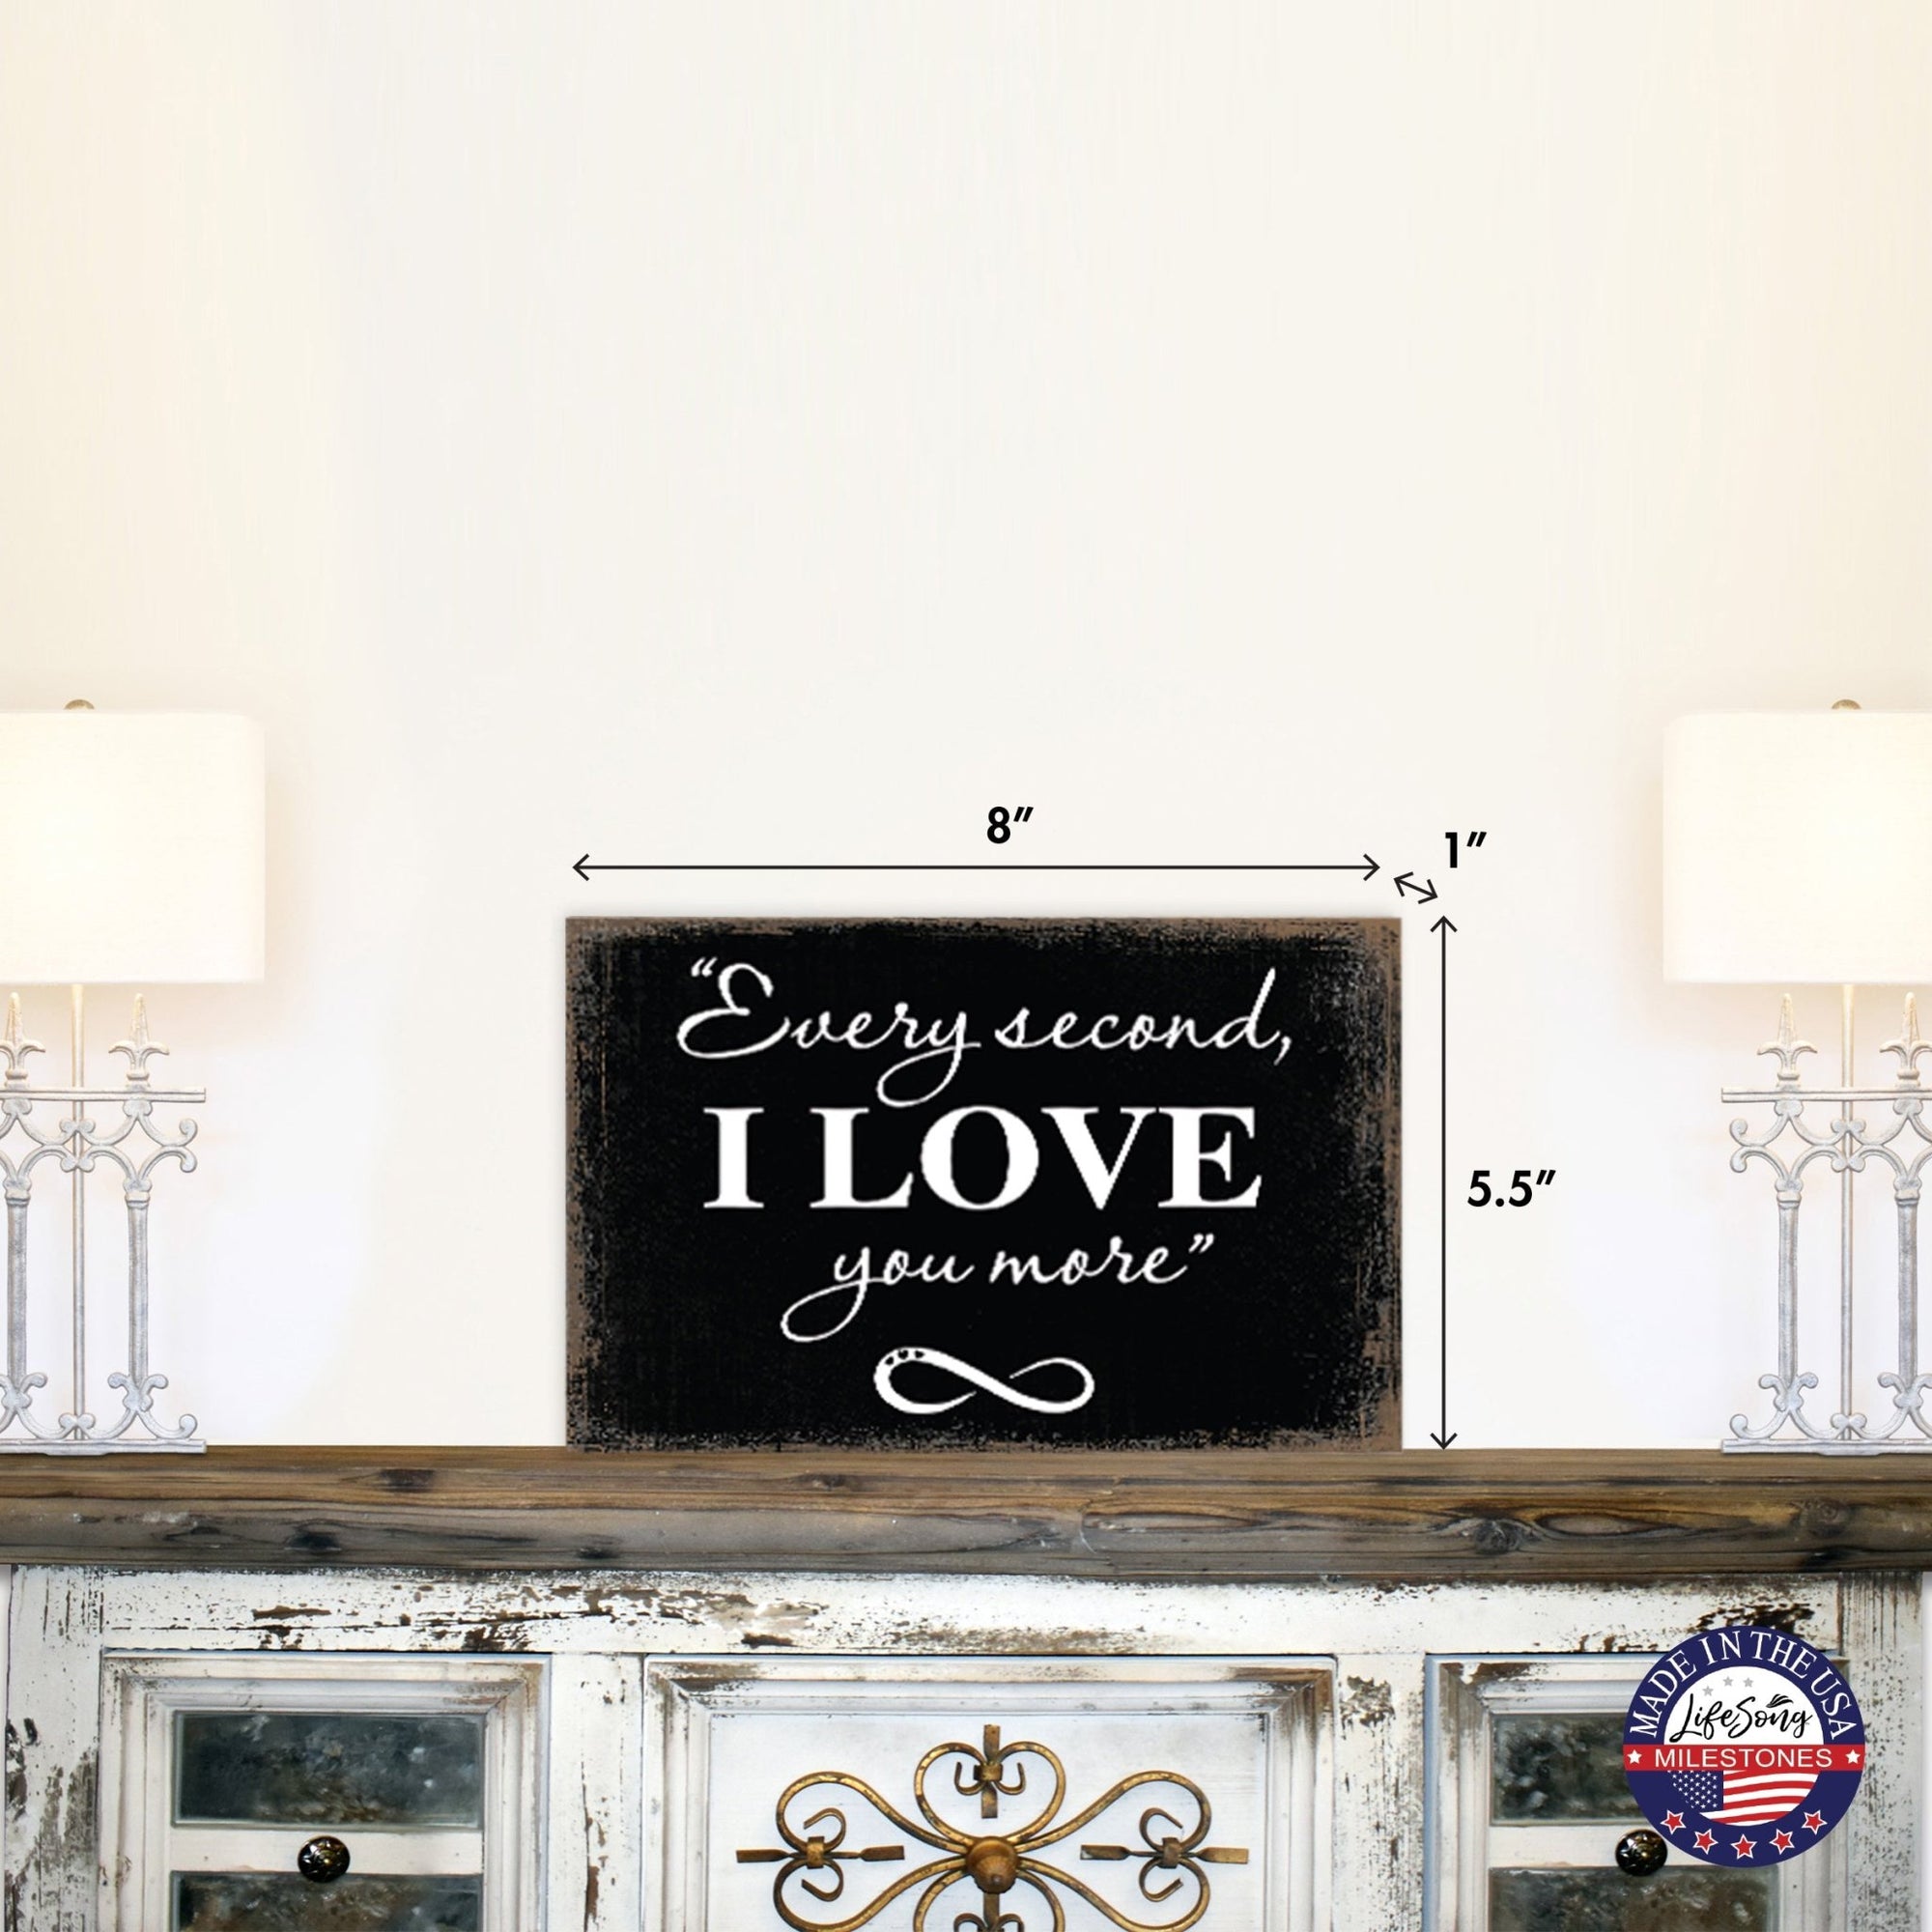 Unique Shelf Decor and Tabletop Signs for Wedding Anniversary Gift for Couples - A Perfect Marriage - LifeSong Milestones